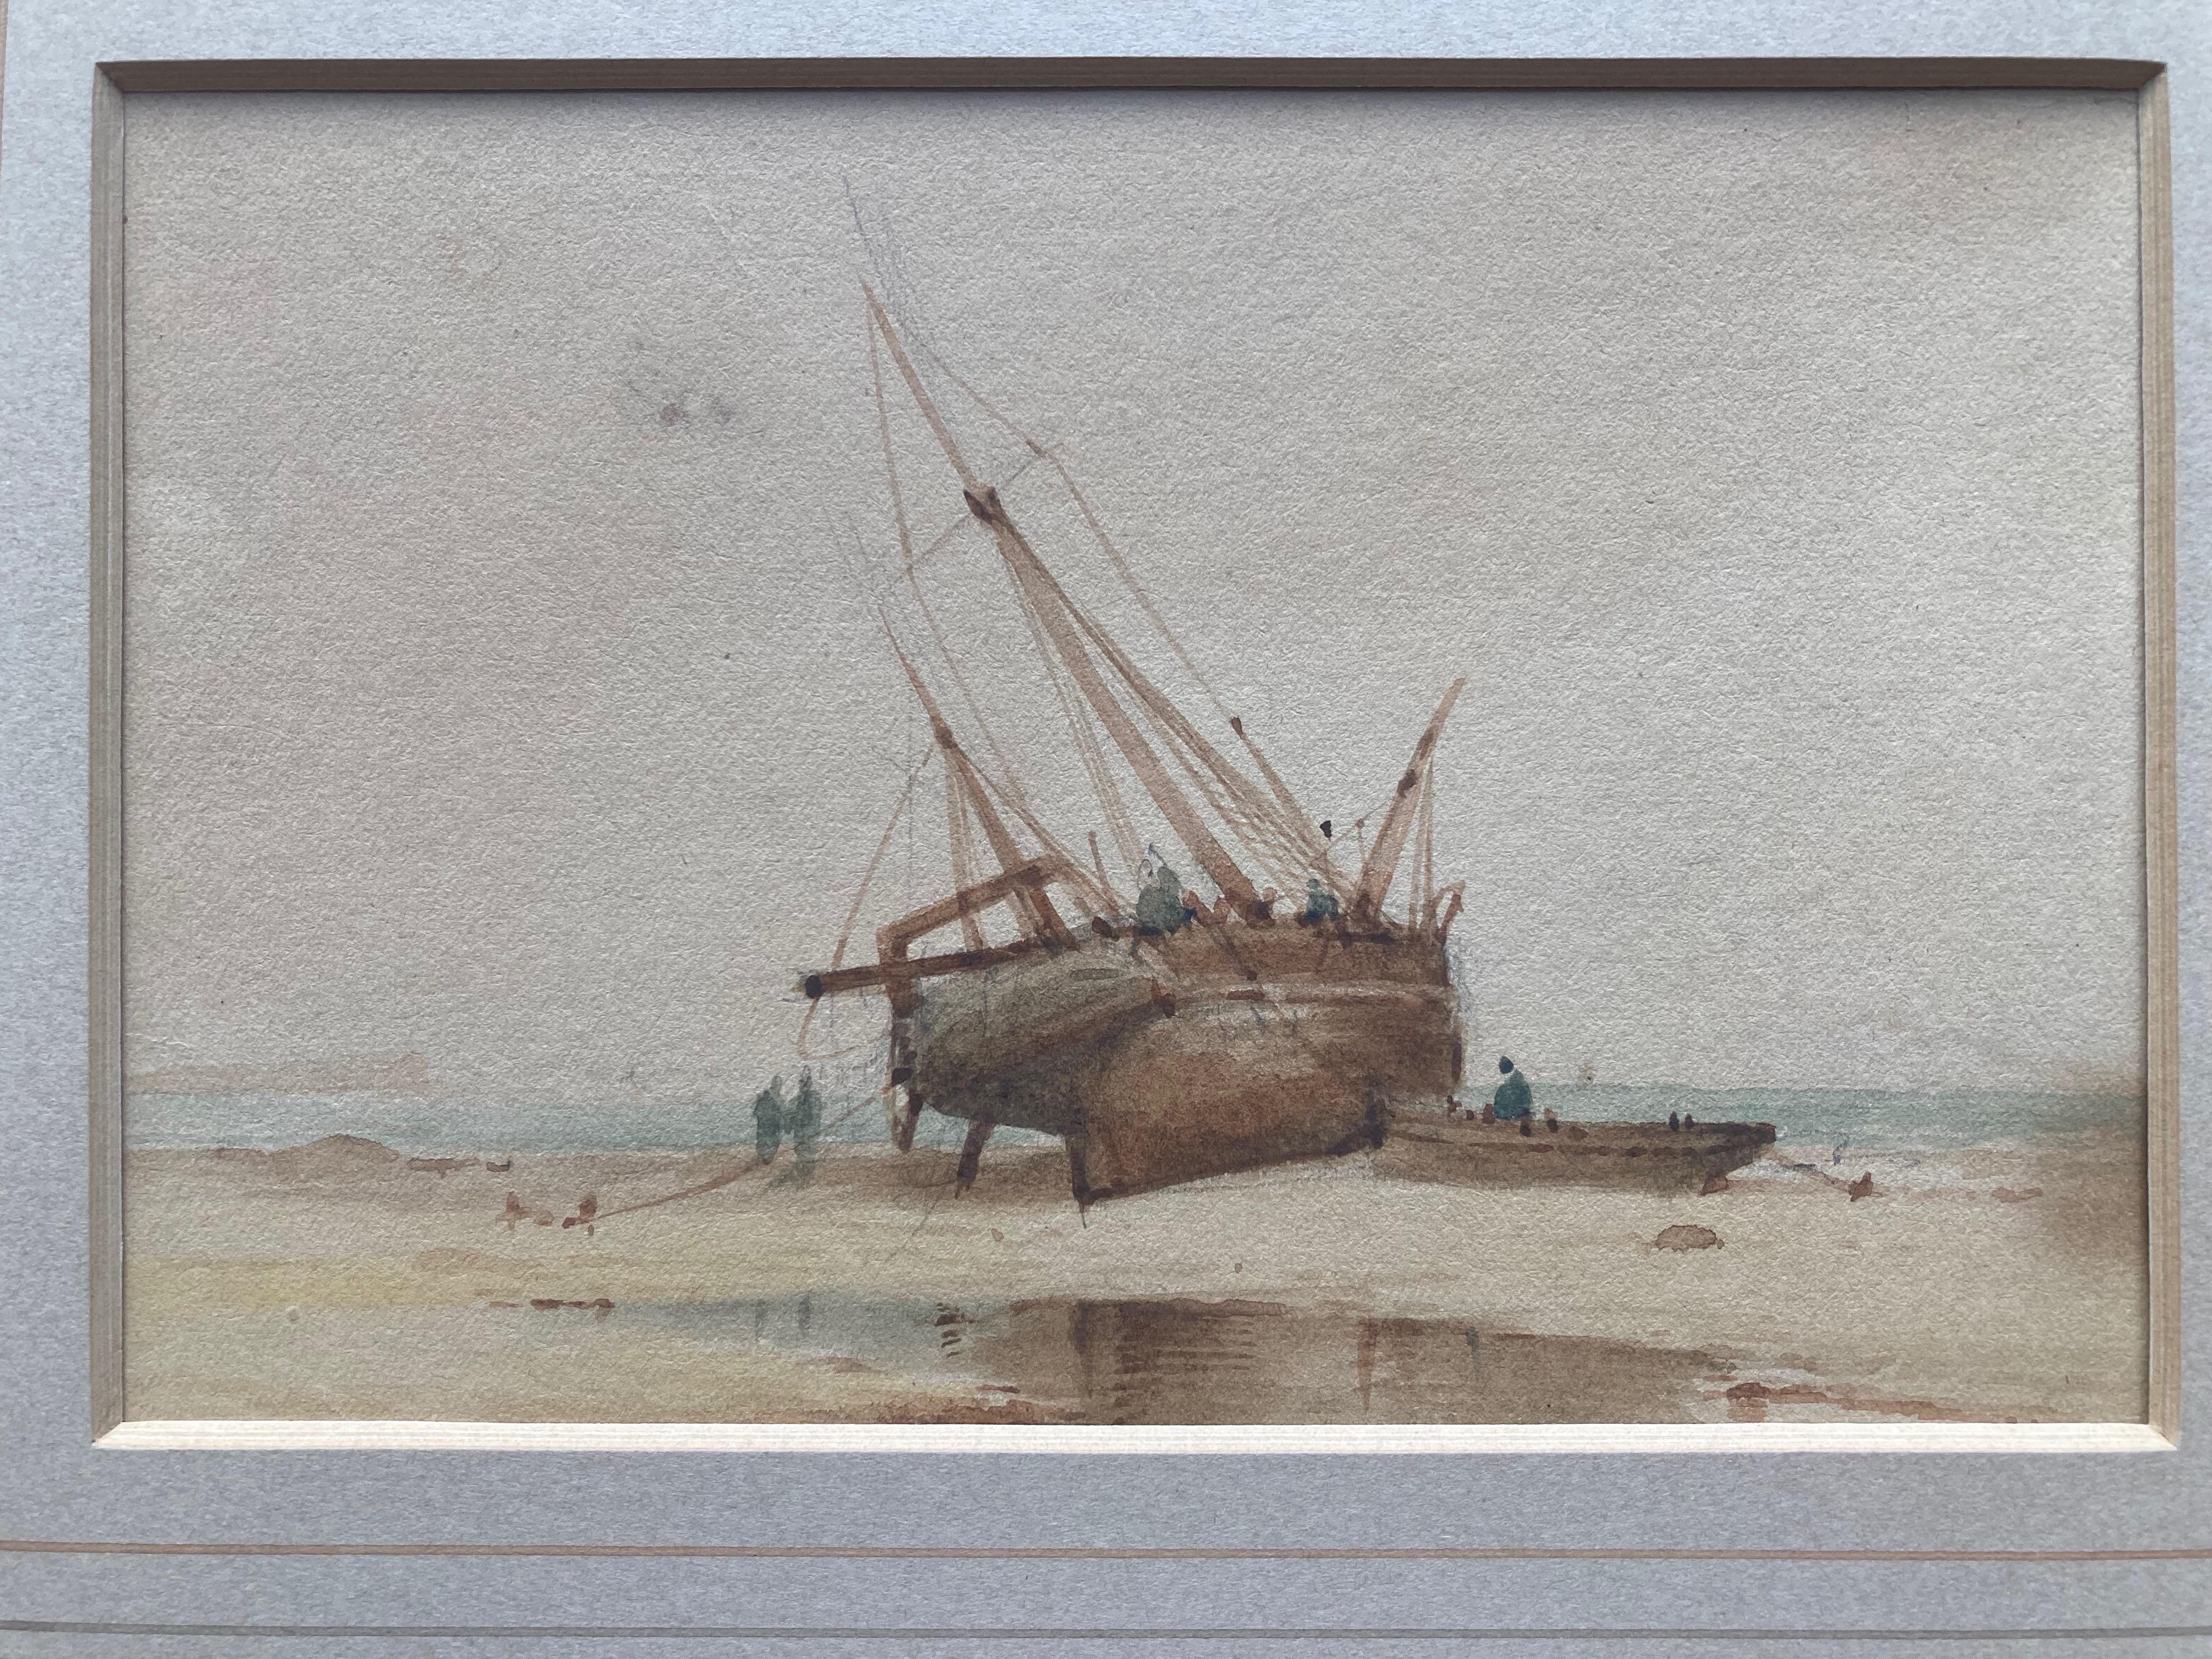 A delicately painted view of figures by a beached fishing vessel on the coast

Follower of Richard Parkes Bonington, 19th Century
Figures on the shore by a beached vessel
Watercolour
4 x 5¾ inches excluding the frame
10 x 12 inches including the